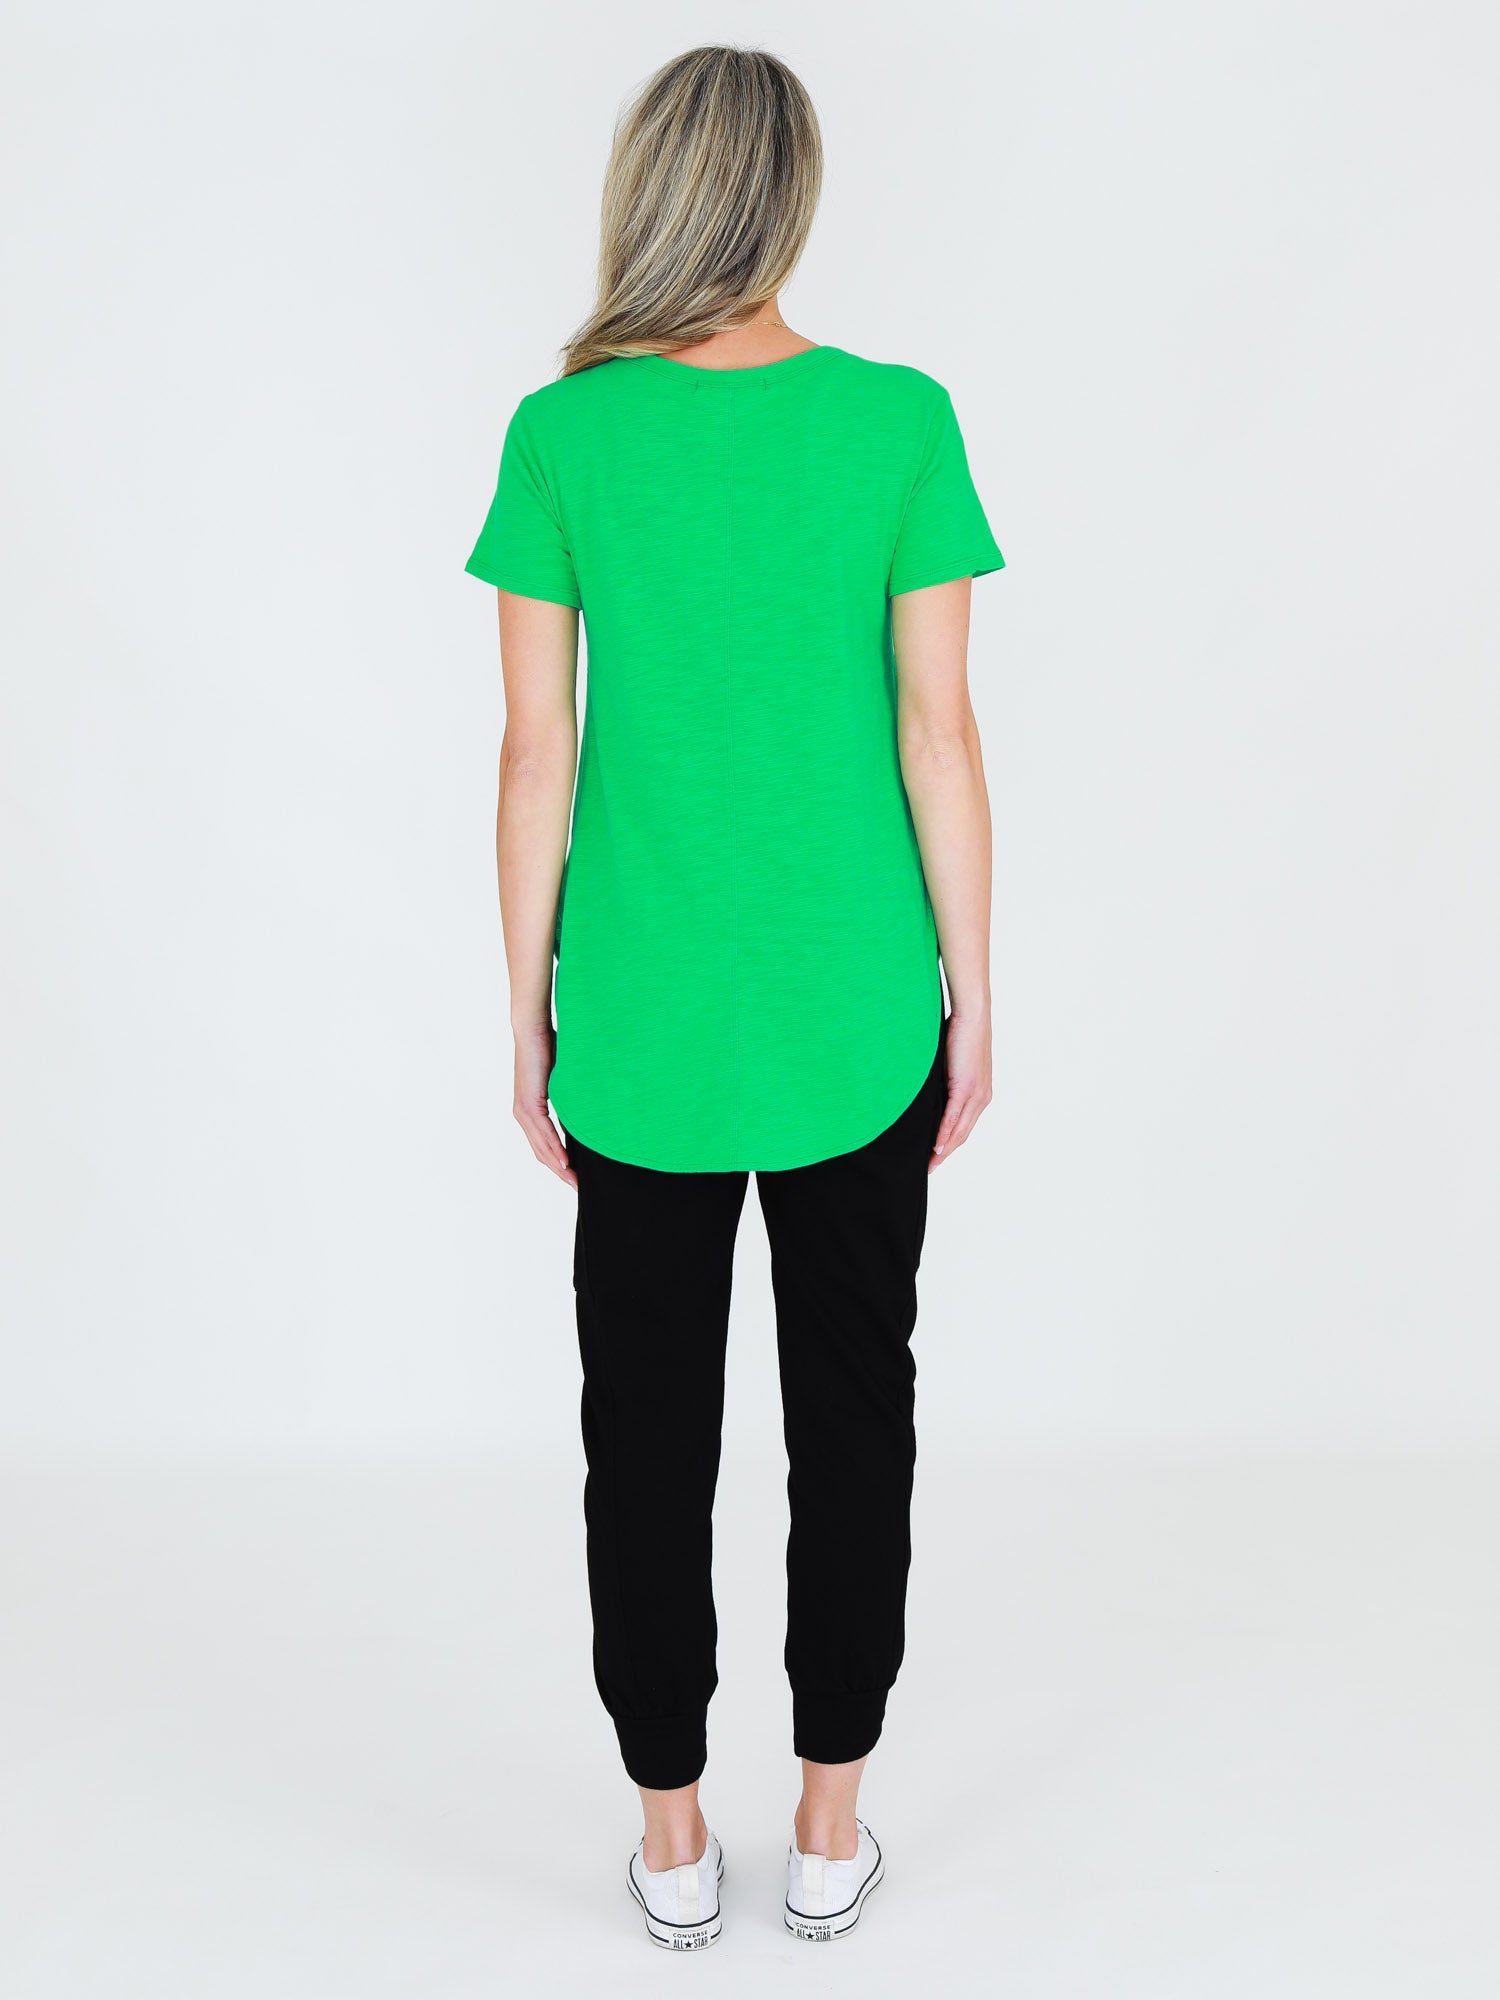 green tee #color_nephrite